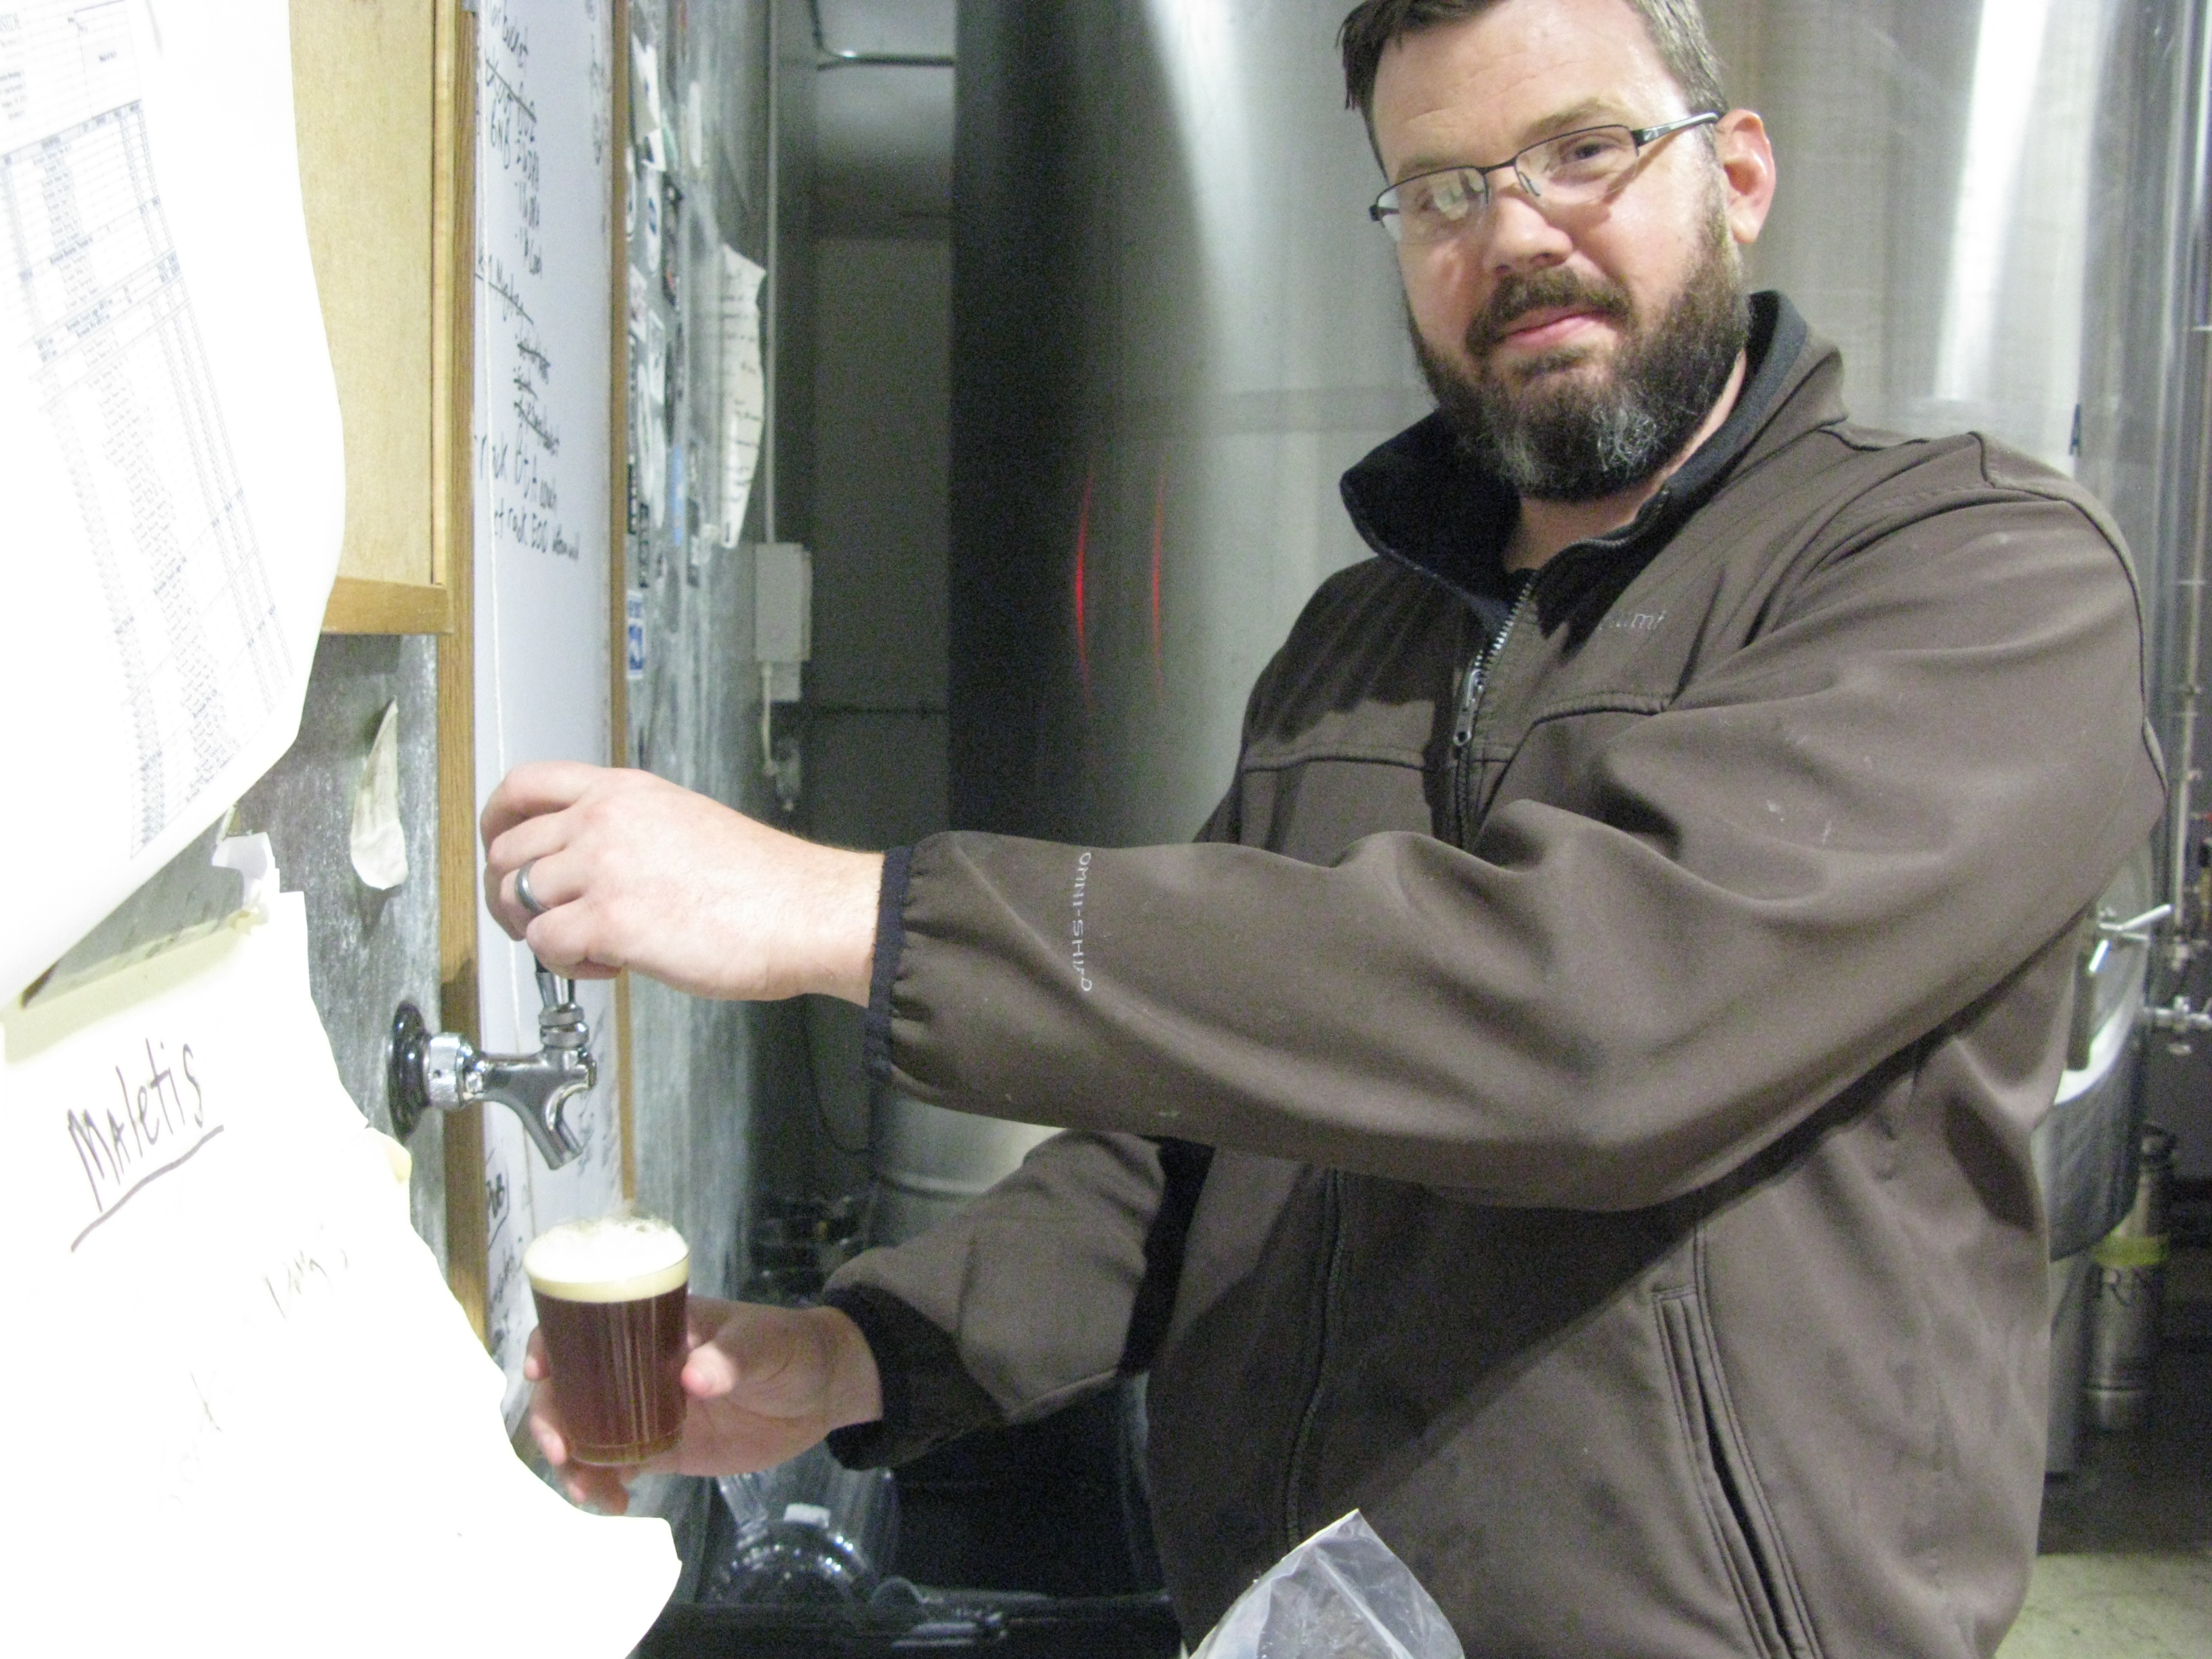 Kory from Burnside Brewing pouring a glass of Permafrost. (FoystonFoto)